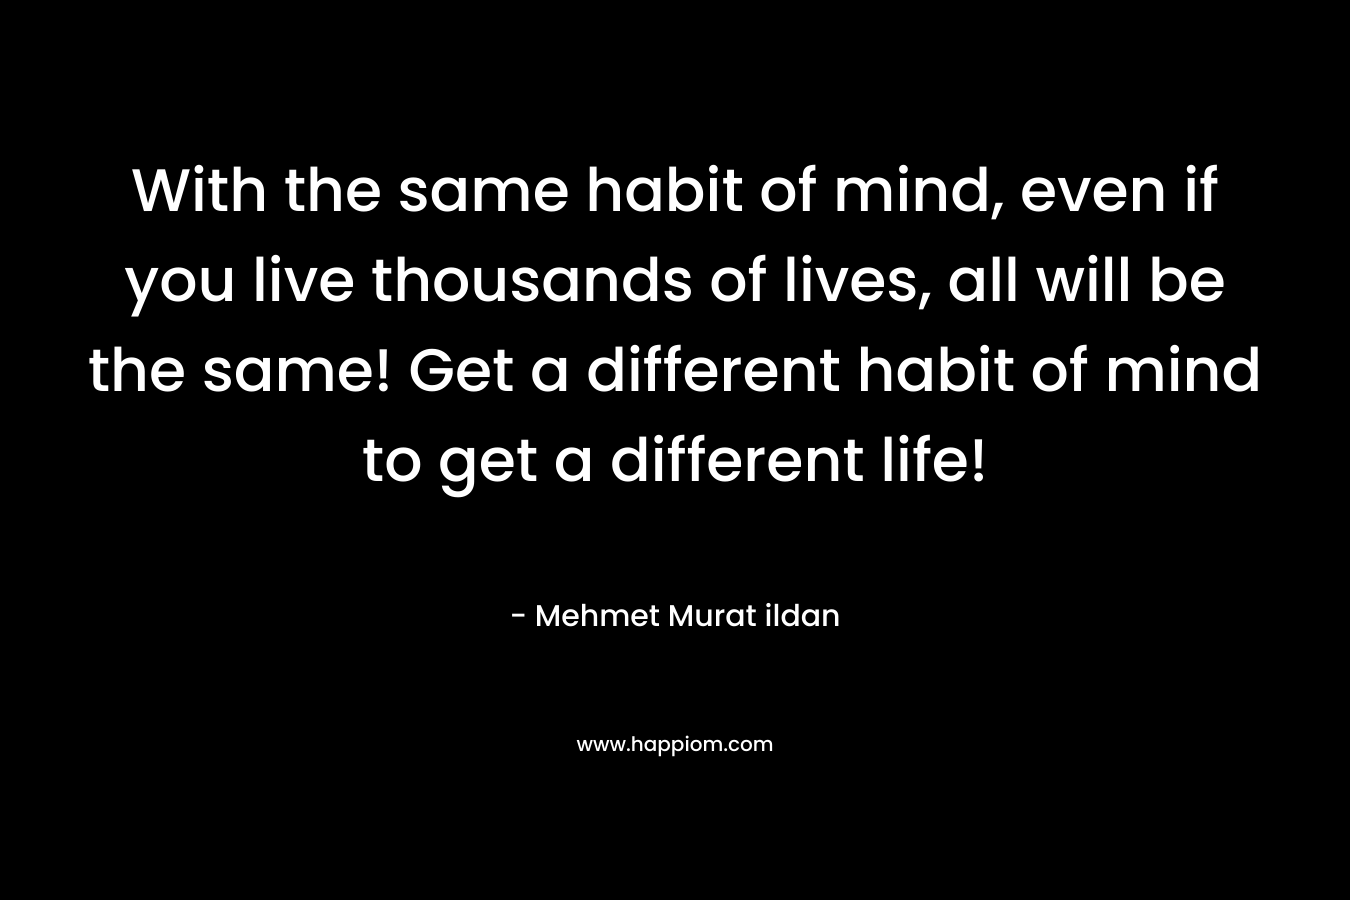 With the same habit of mind, even if you live thousands of lives, all will be the same! Get a different habit of mind to get a different life!